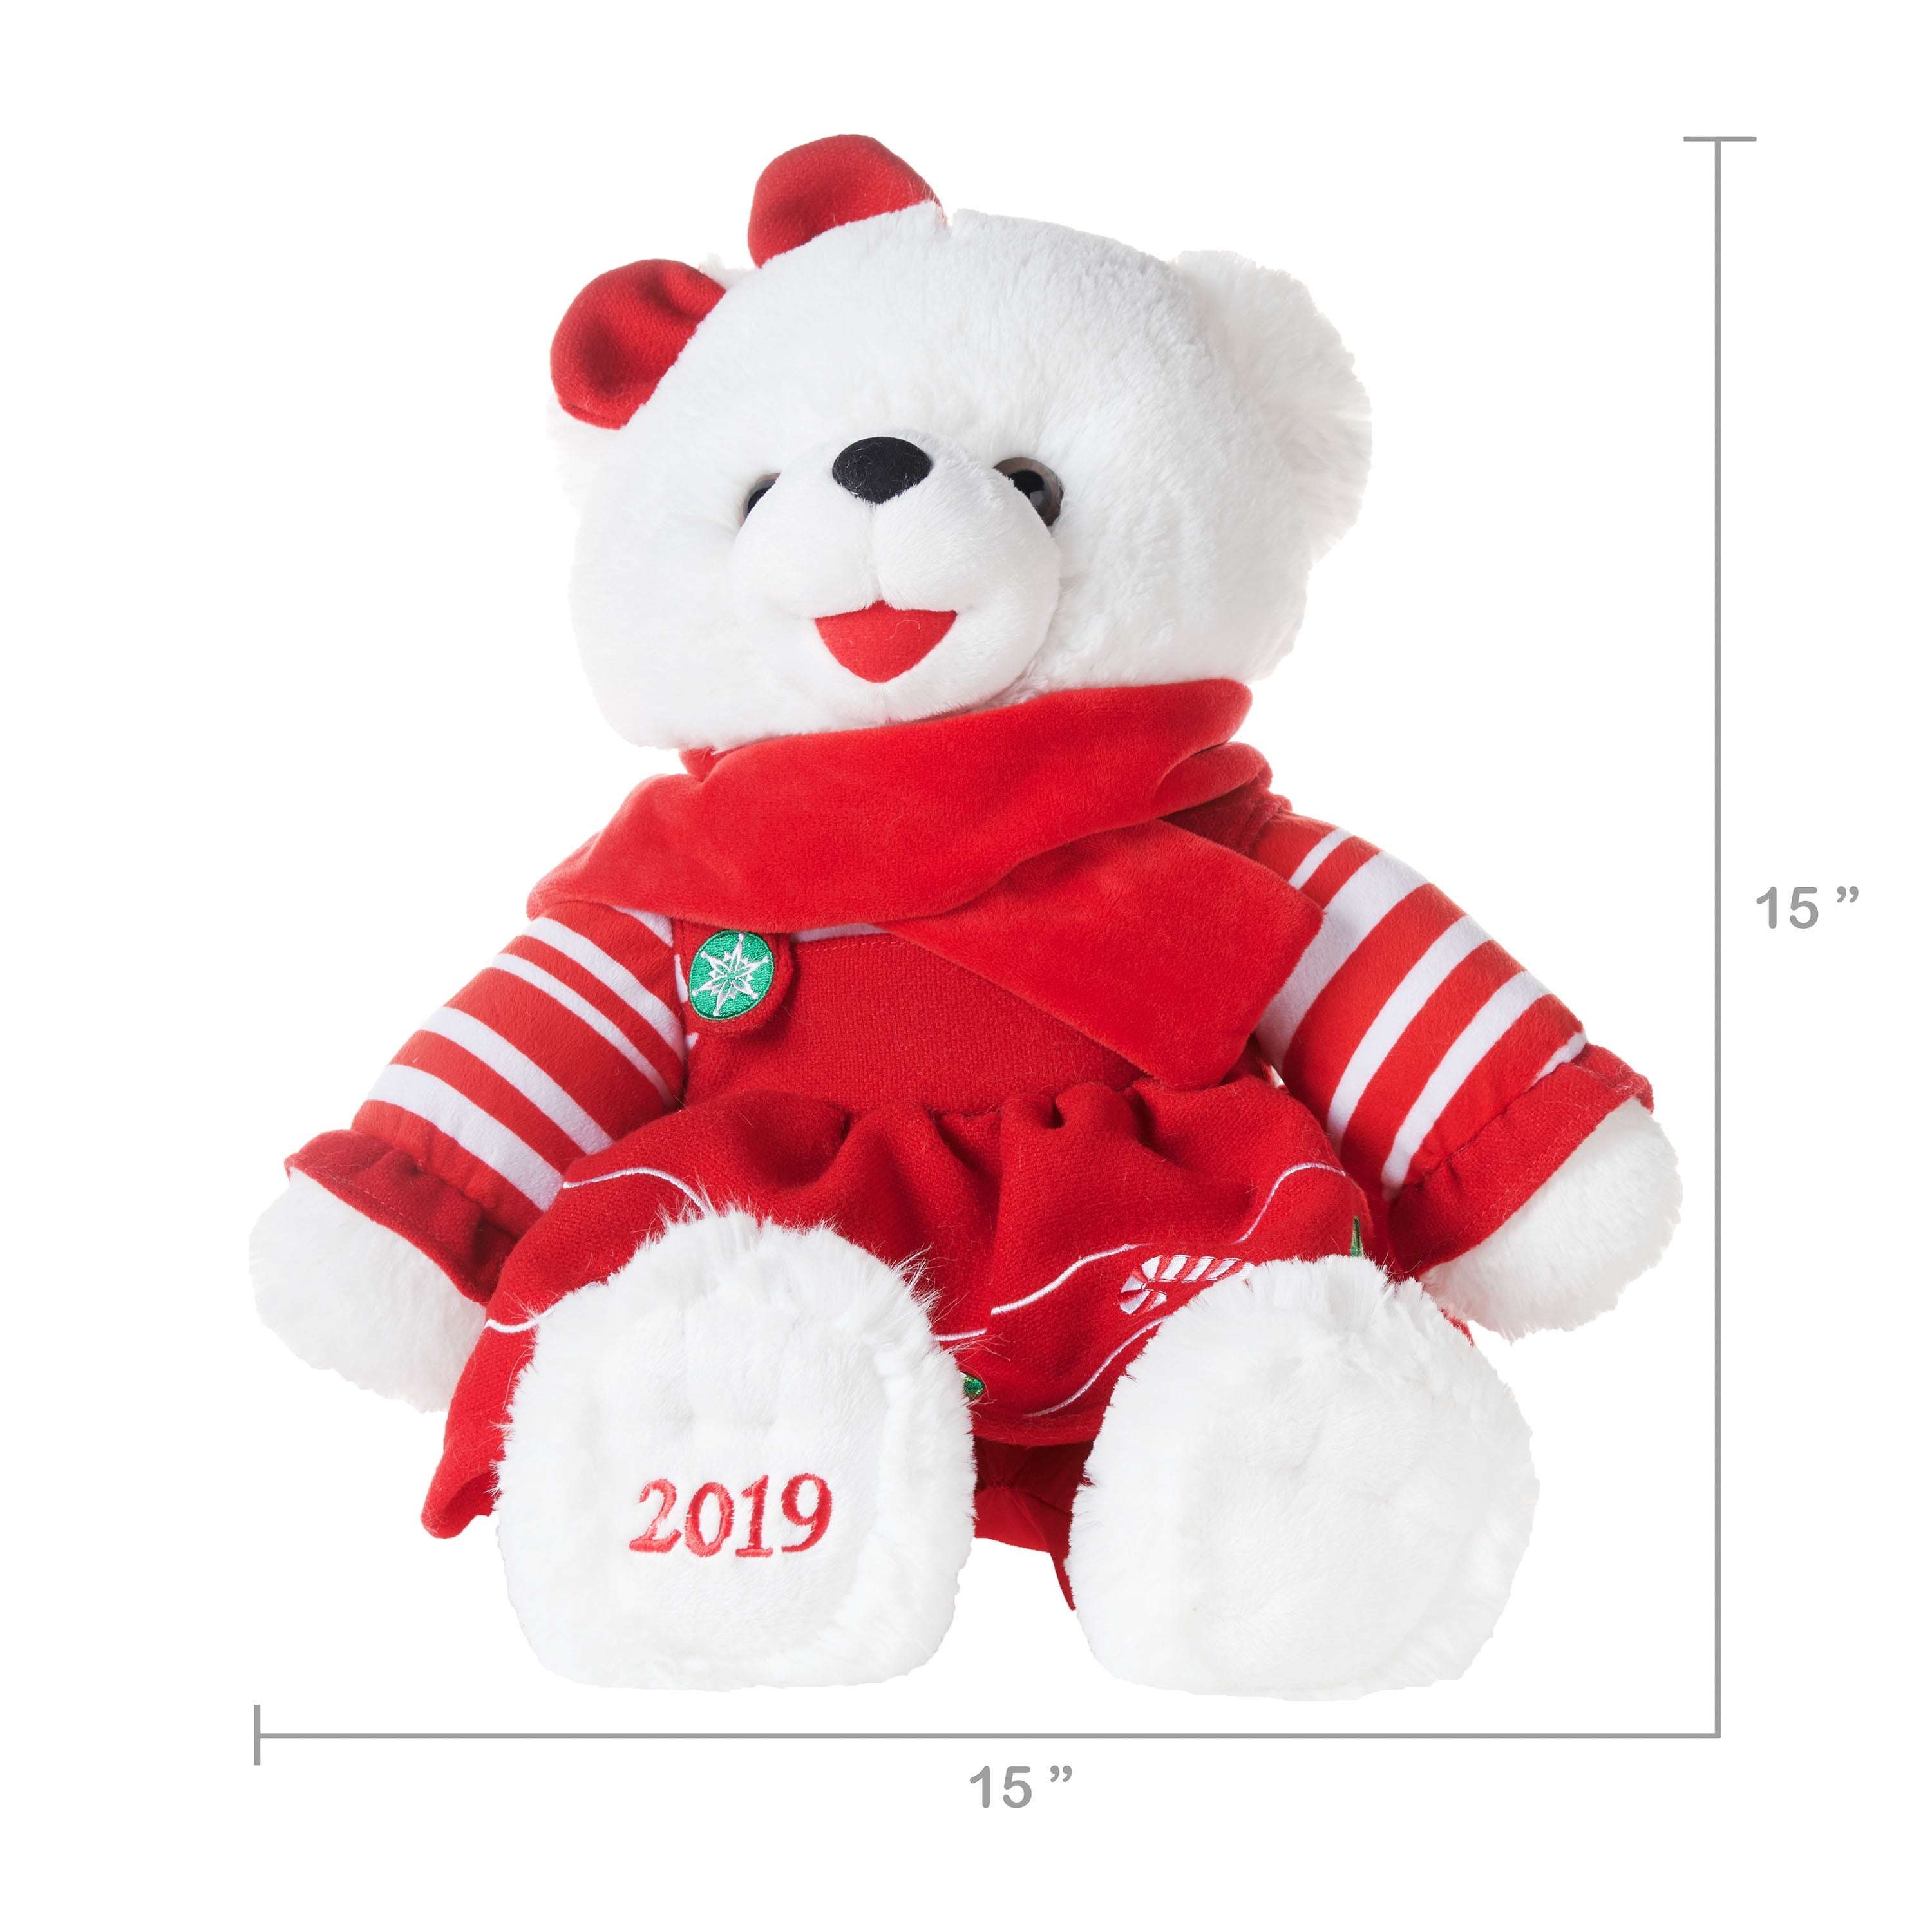 2019 WalMART CHRISTMAS Snowflake TEDDY BEAR White A Boy 13" Red Outfit Brand New